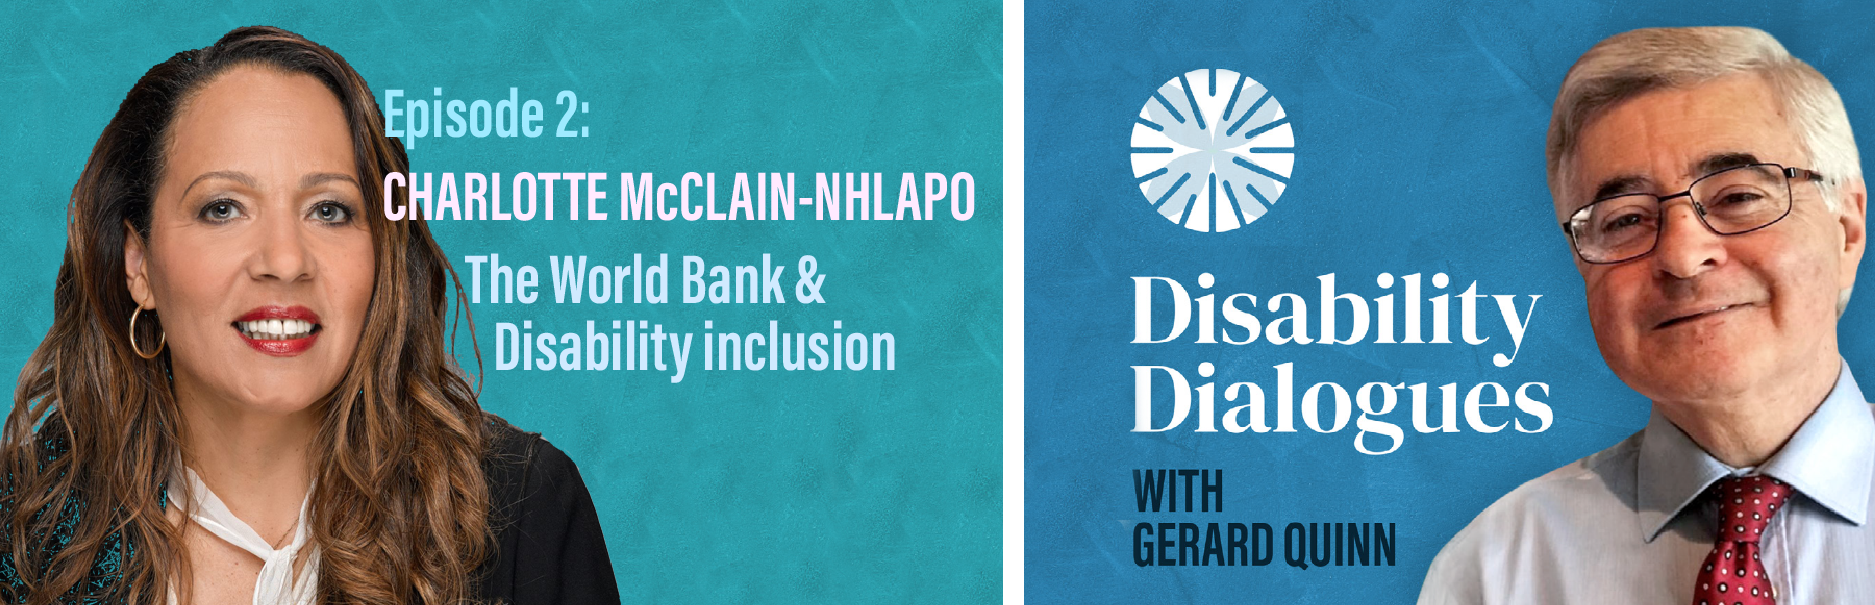 Banner of Podcast Disability Dialogues, Episode 2, featuring Photos of Gerard Quinn and Charlotte McClain Nhlapo